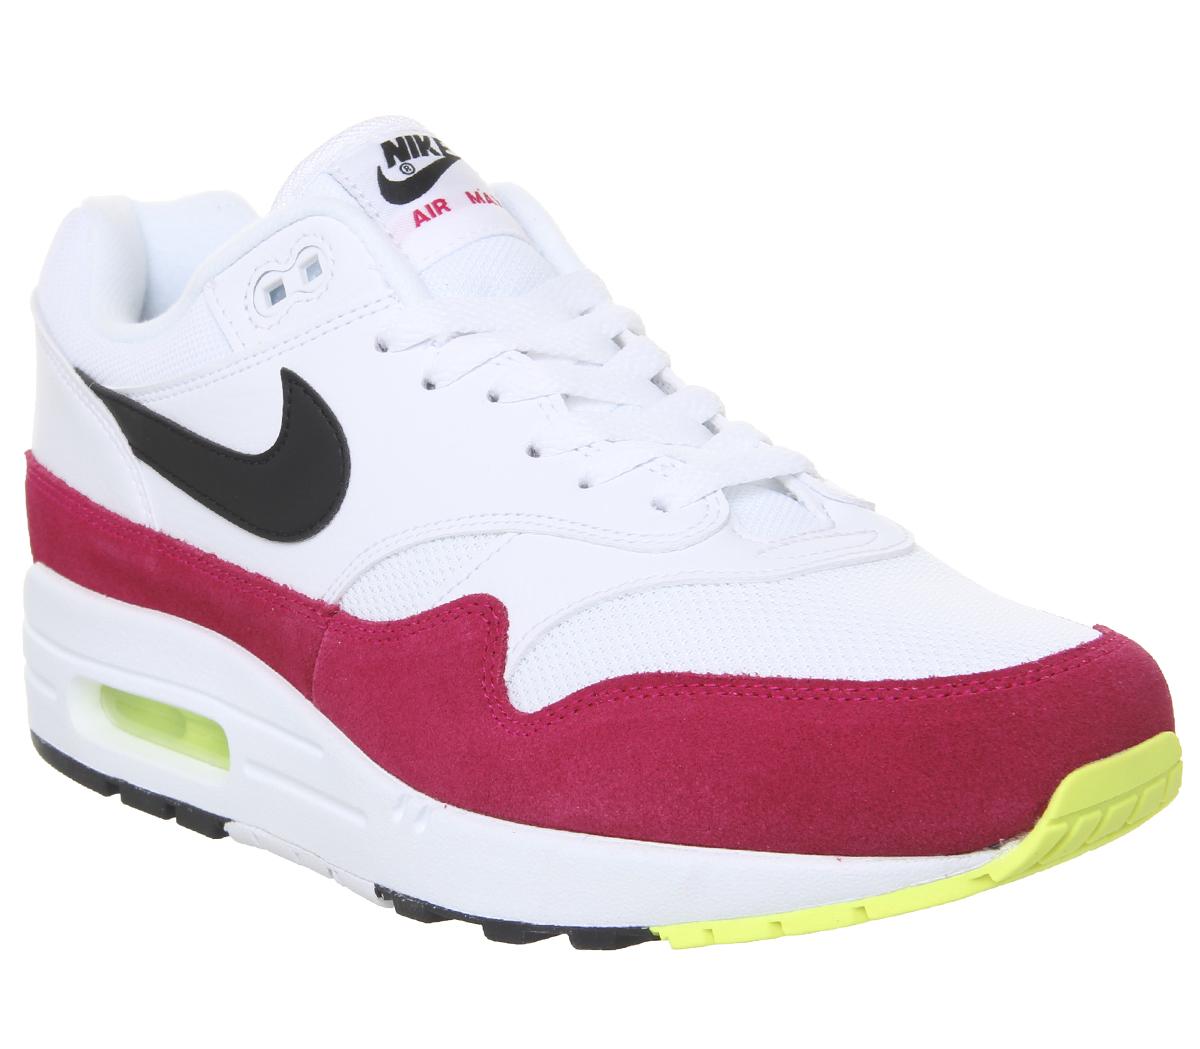 Dinkarville test Straat Nike Air Max 1 Trainers White Black Volt Rush Pink - Nike Air Max